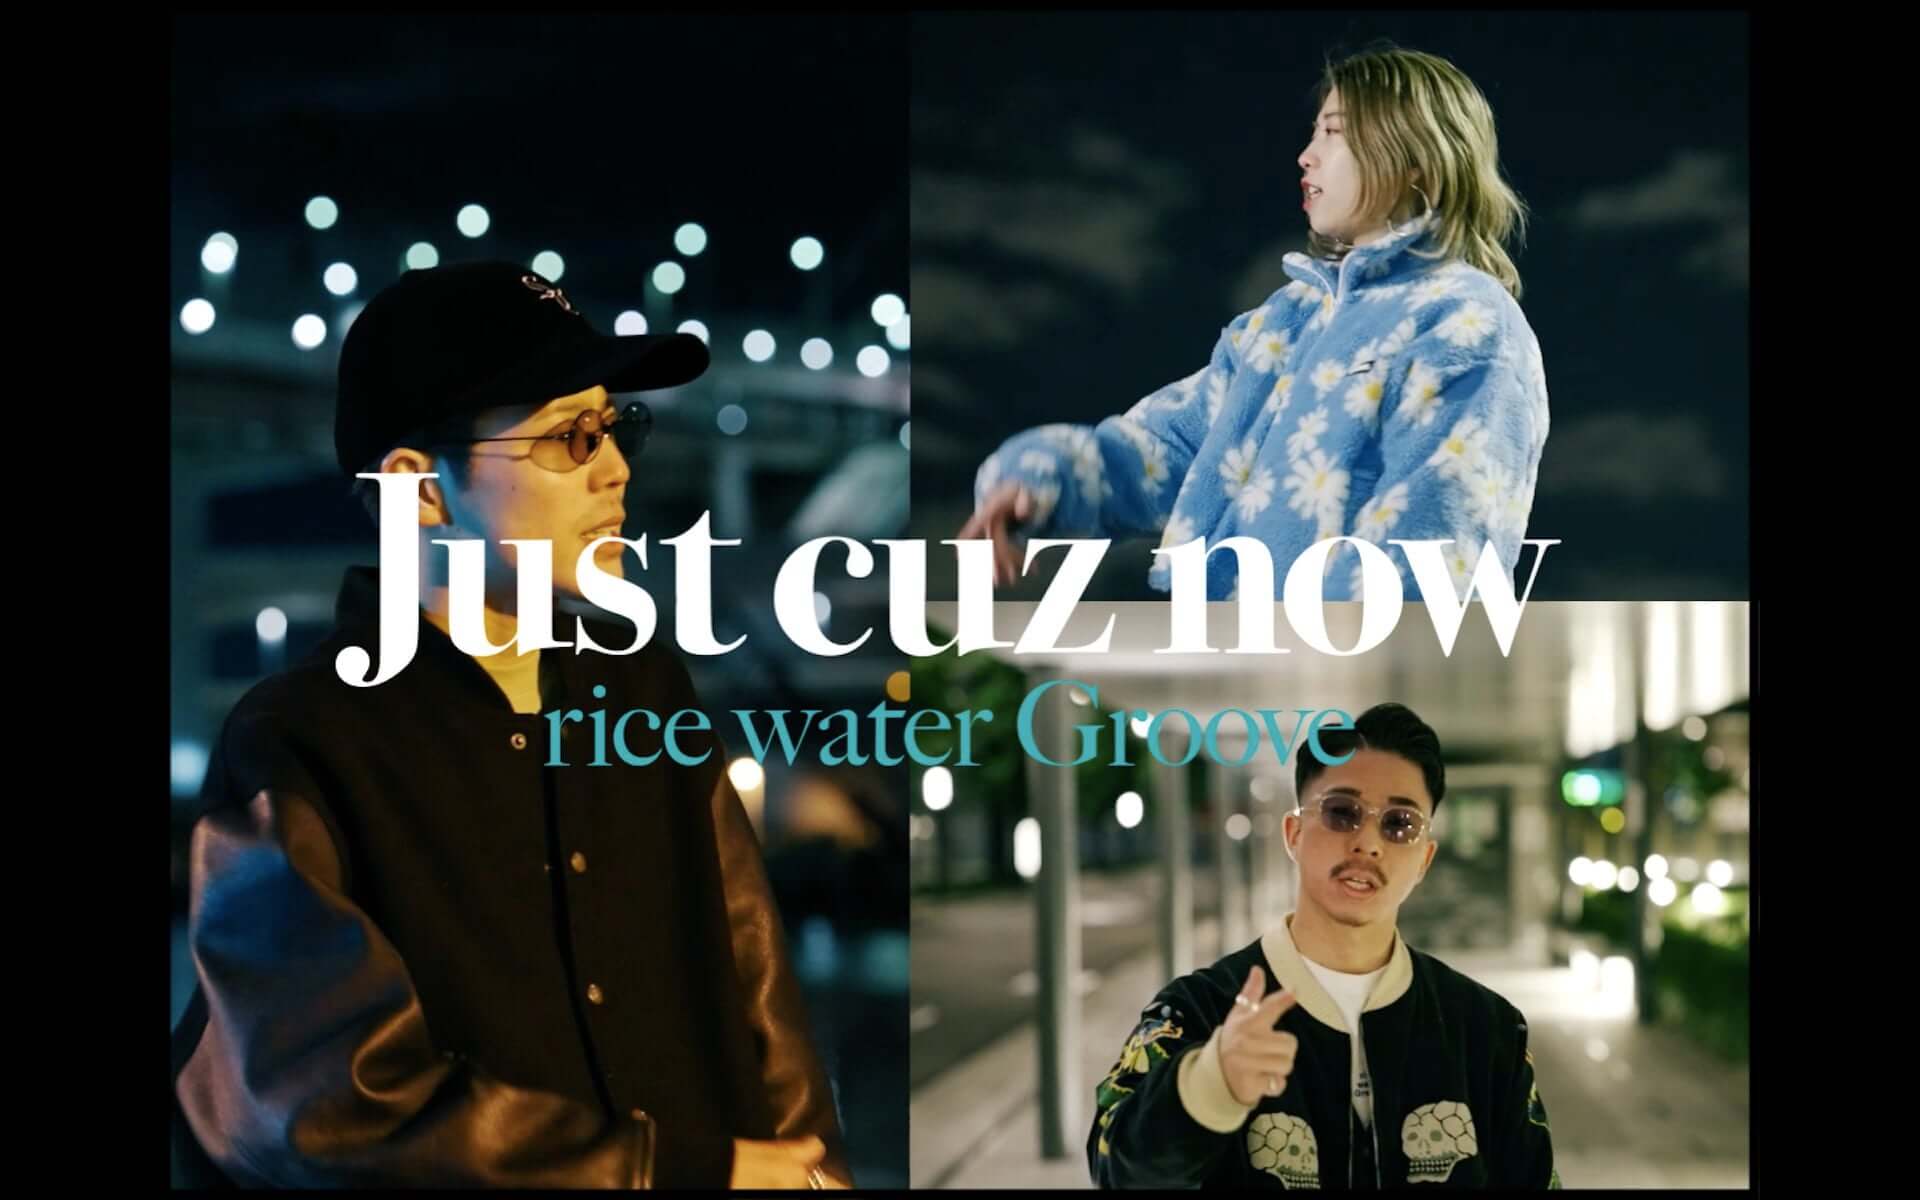 rice water Groove、7作目のシングル“Just cuz now”を〈Doggy G Central Records〉よりリリース！MVも公開 music210217_rice-water-groove_3-1920x1200